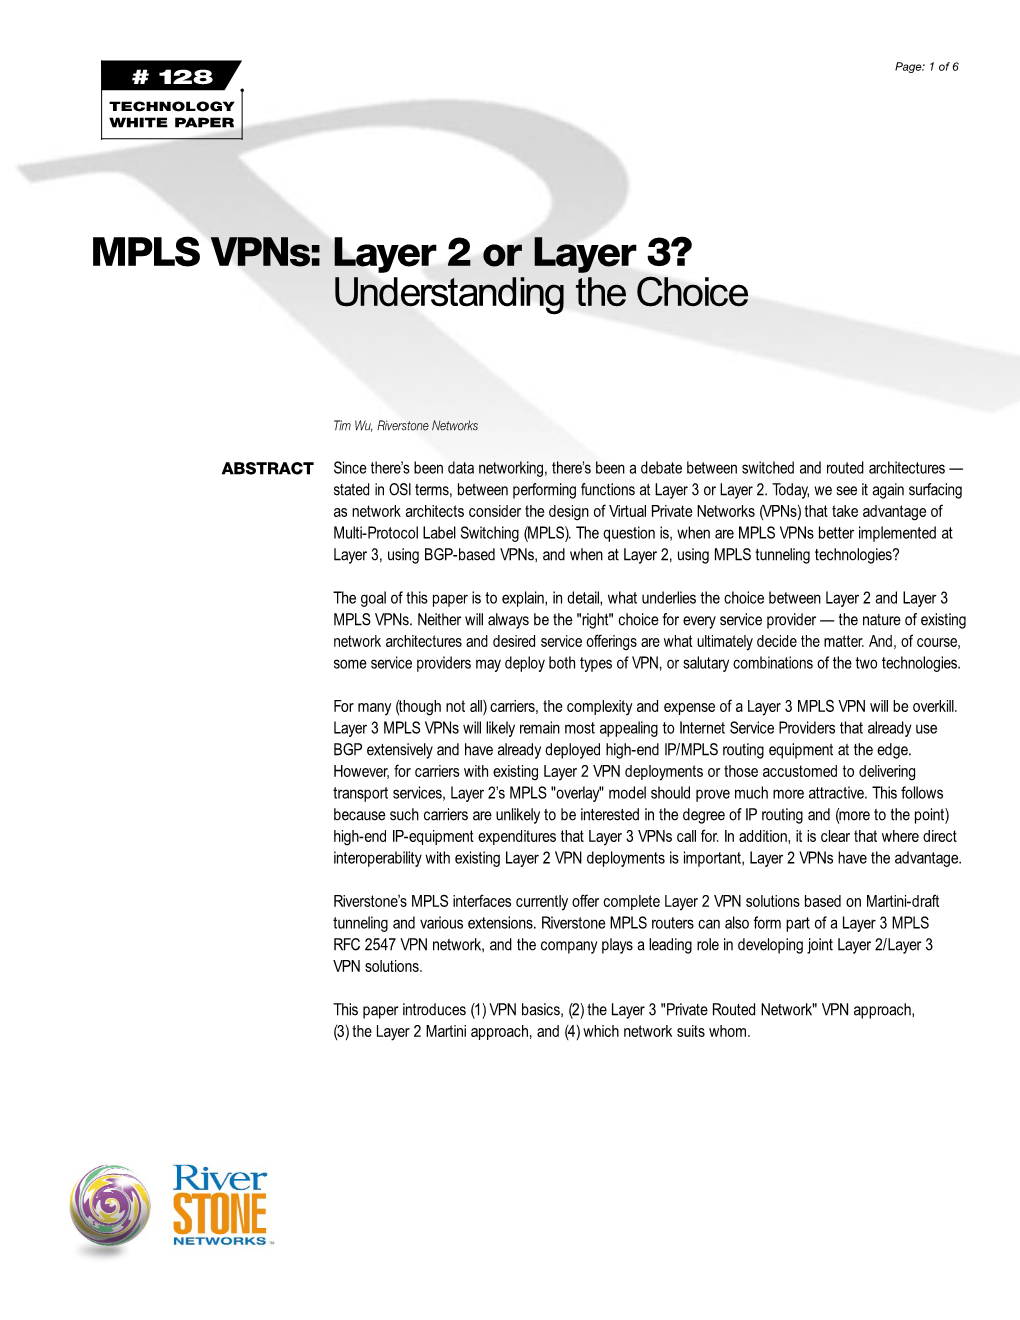 MPLS Vpns: Layer 2 Or Layer 3? Understanding the Choice